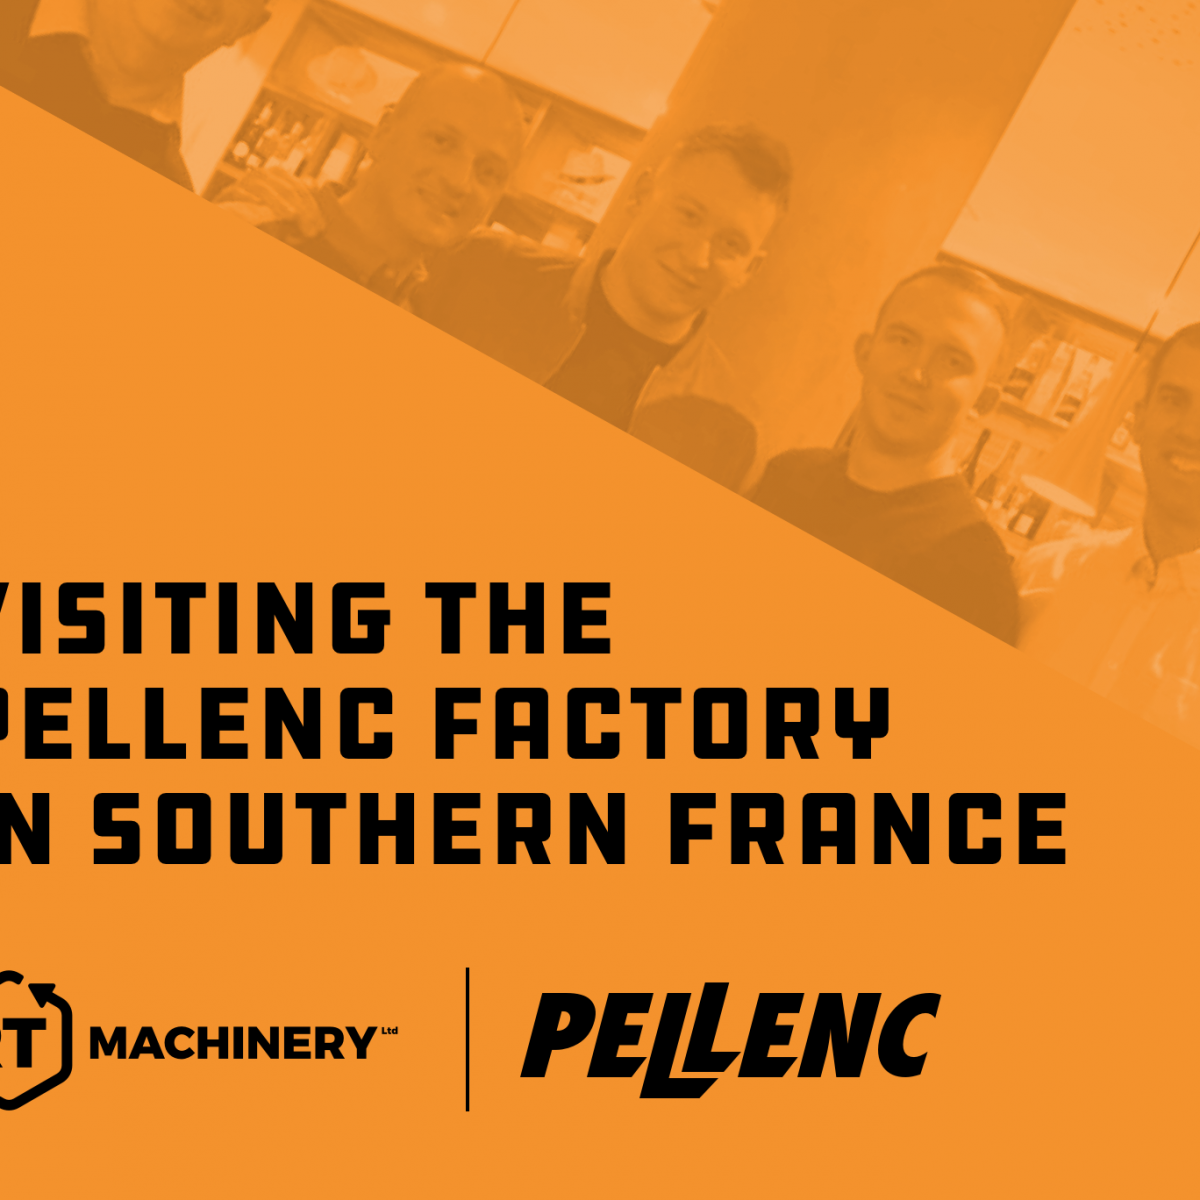 Visiting the Pellenc Factory in Southern France